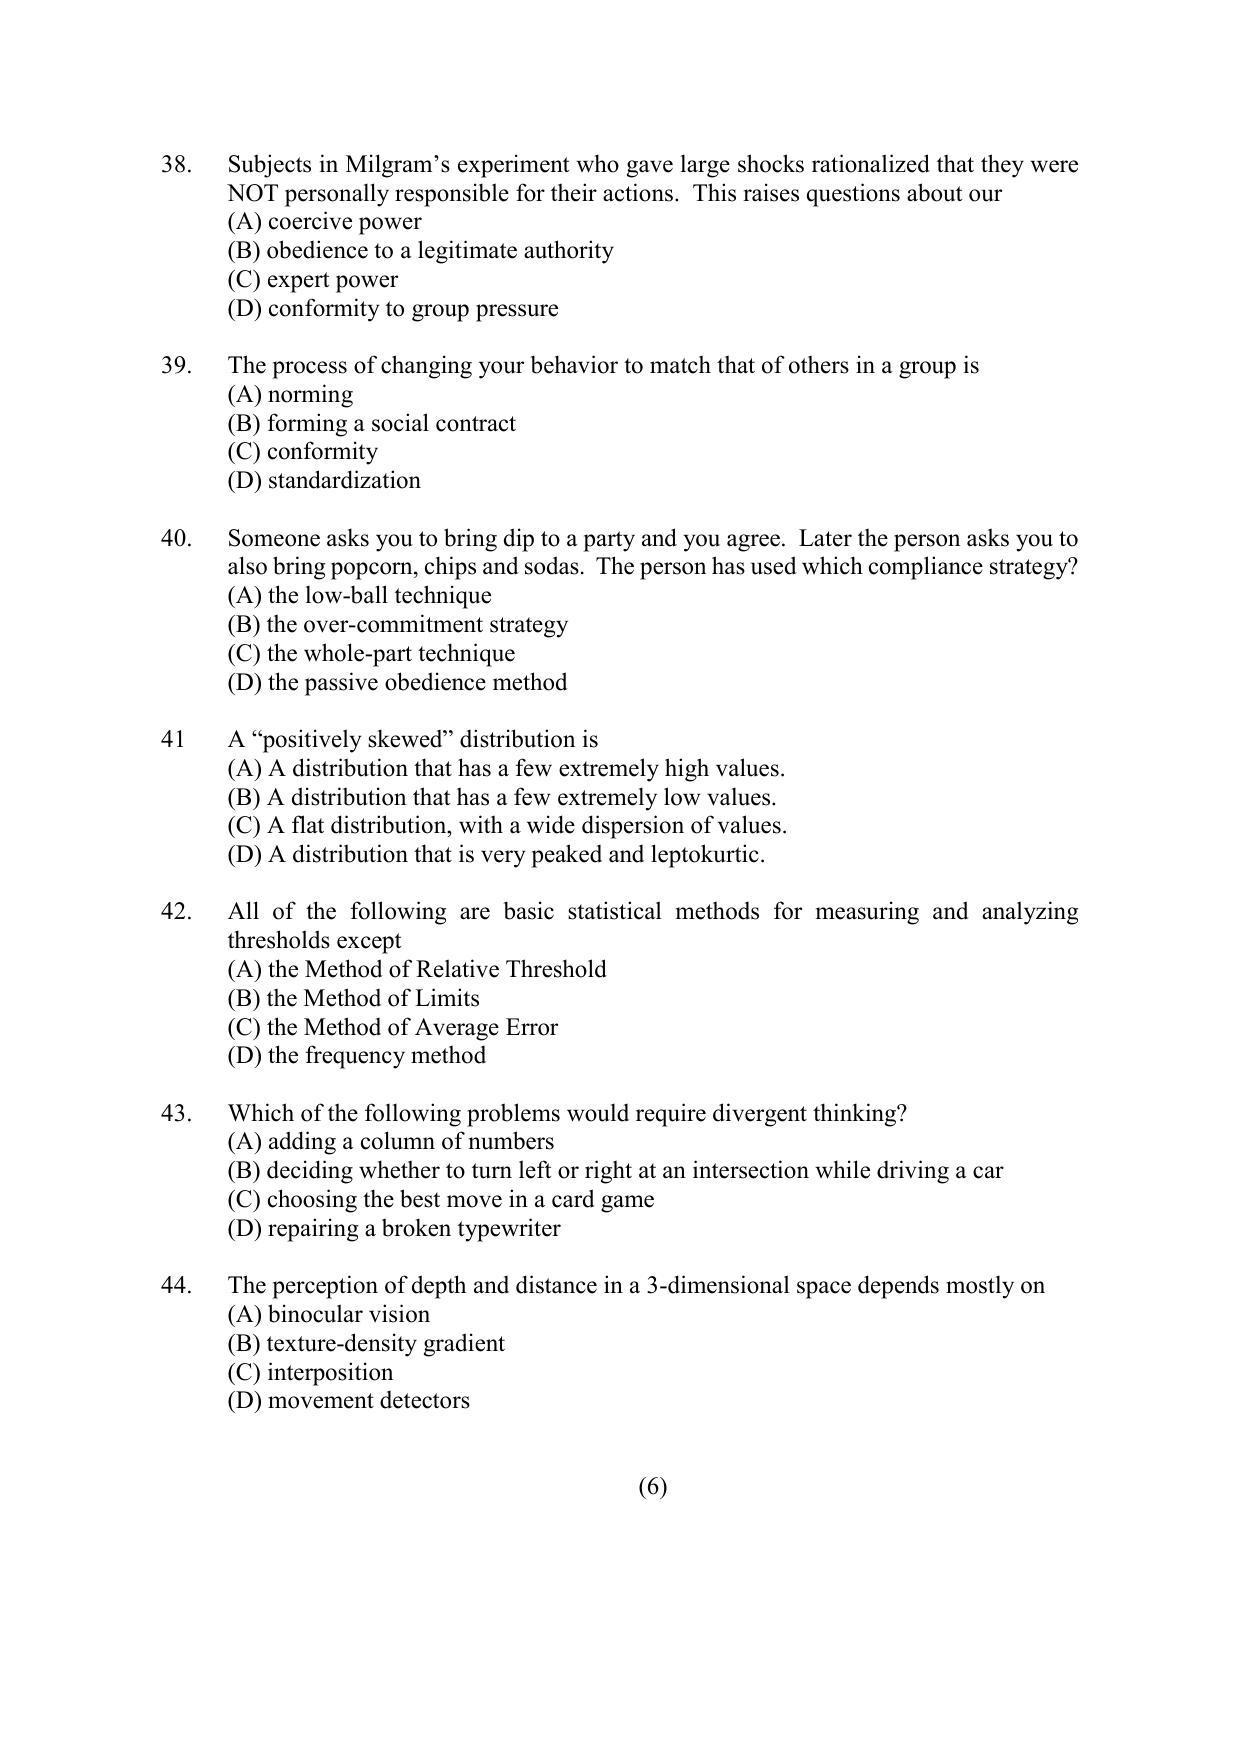 PU MPET Ancient Indian History & Archeology 2022 Question Papers - Page 37